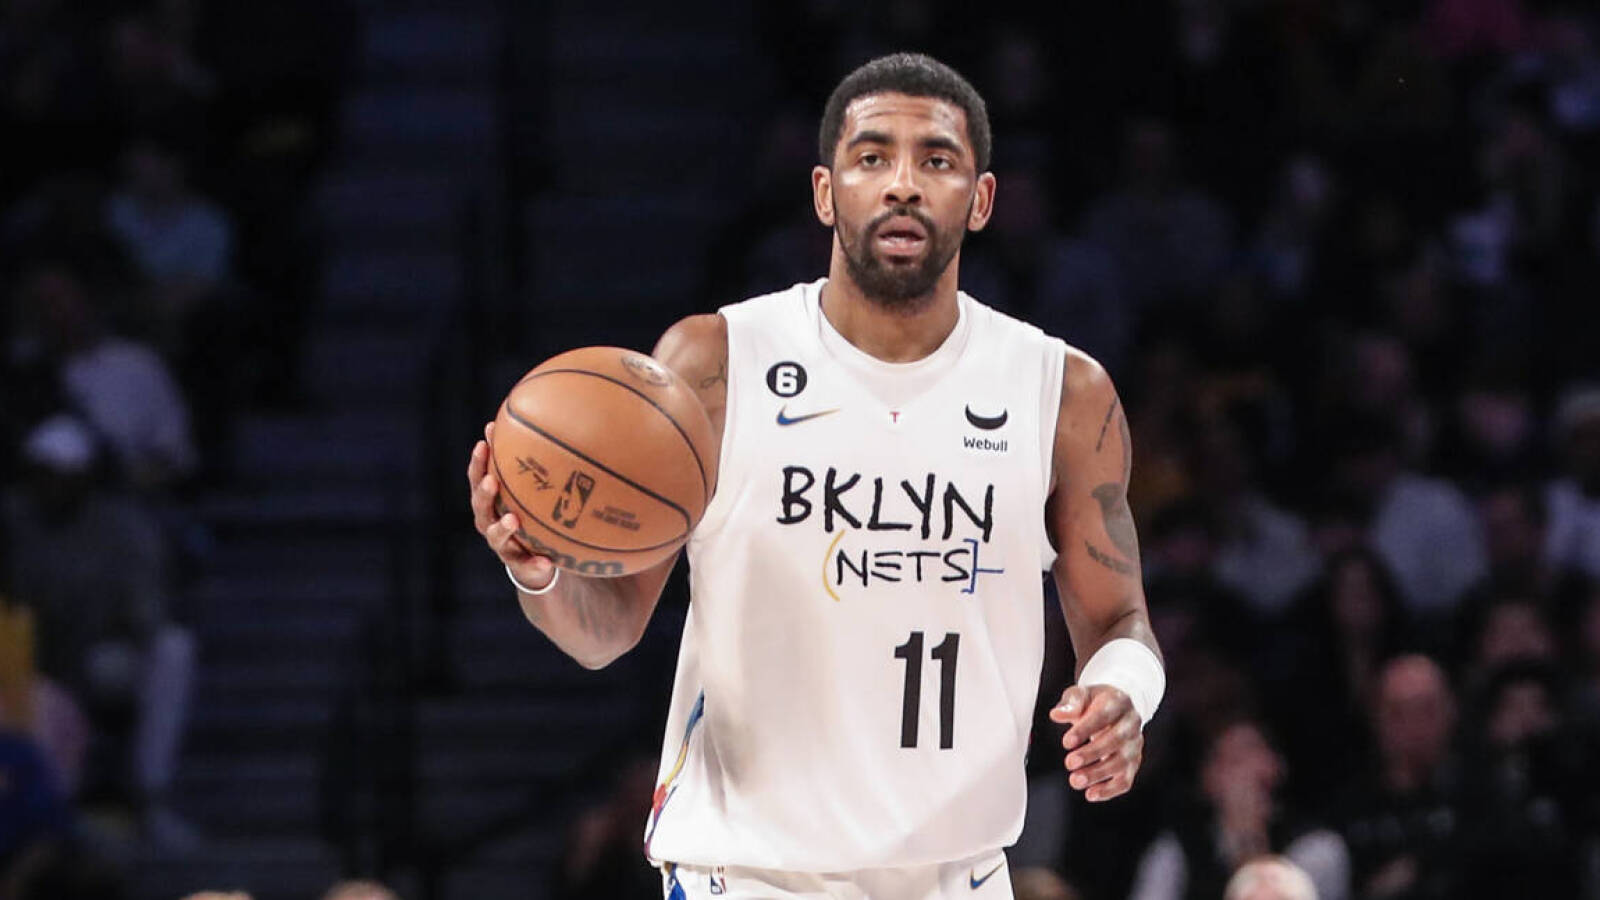 New York City mayor takes parting shot at Kyrie Irving after trade